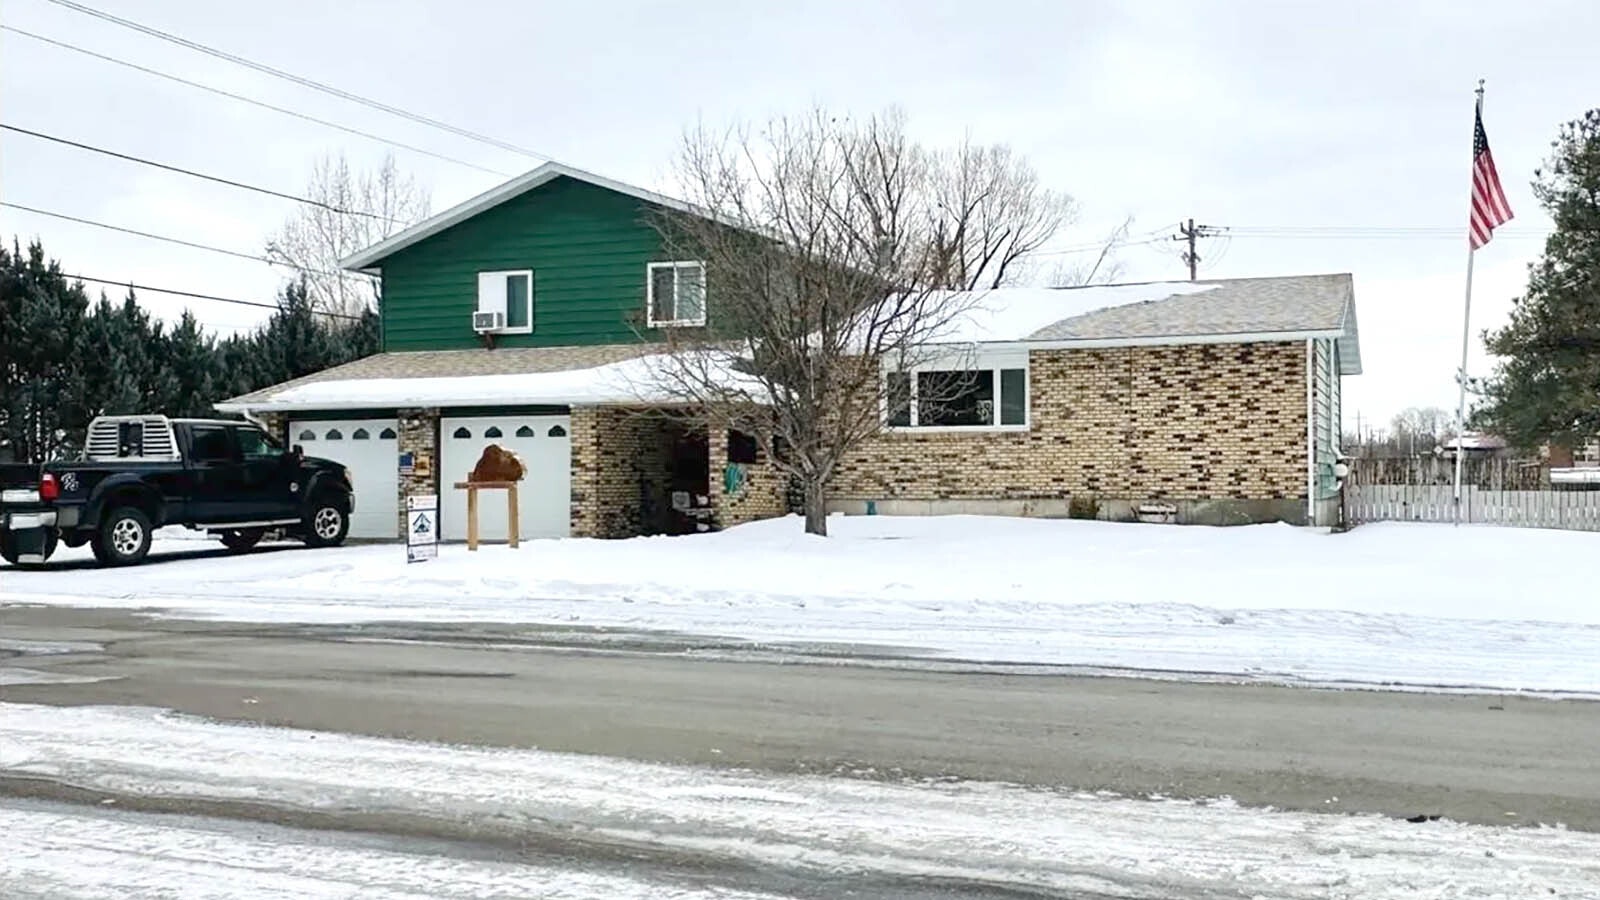 This home in Riverton is a little over 2,500 square feet and lists at $387,000.